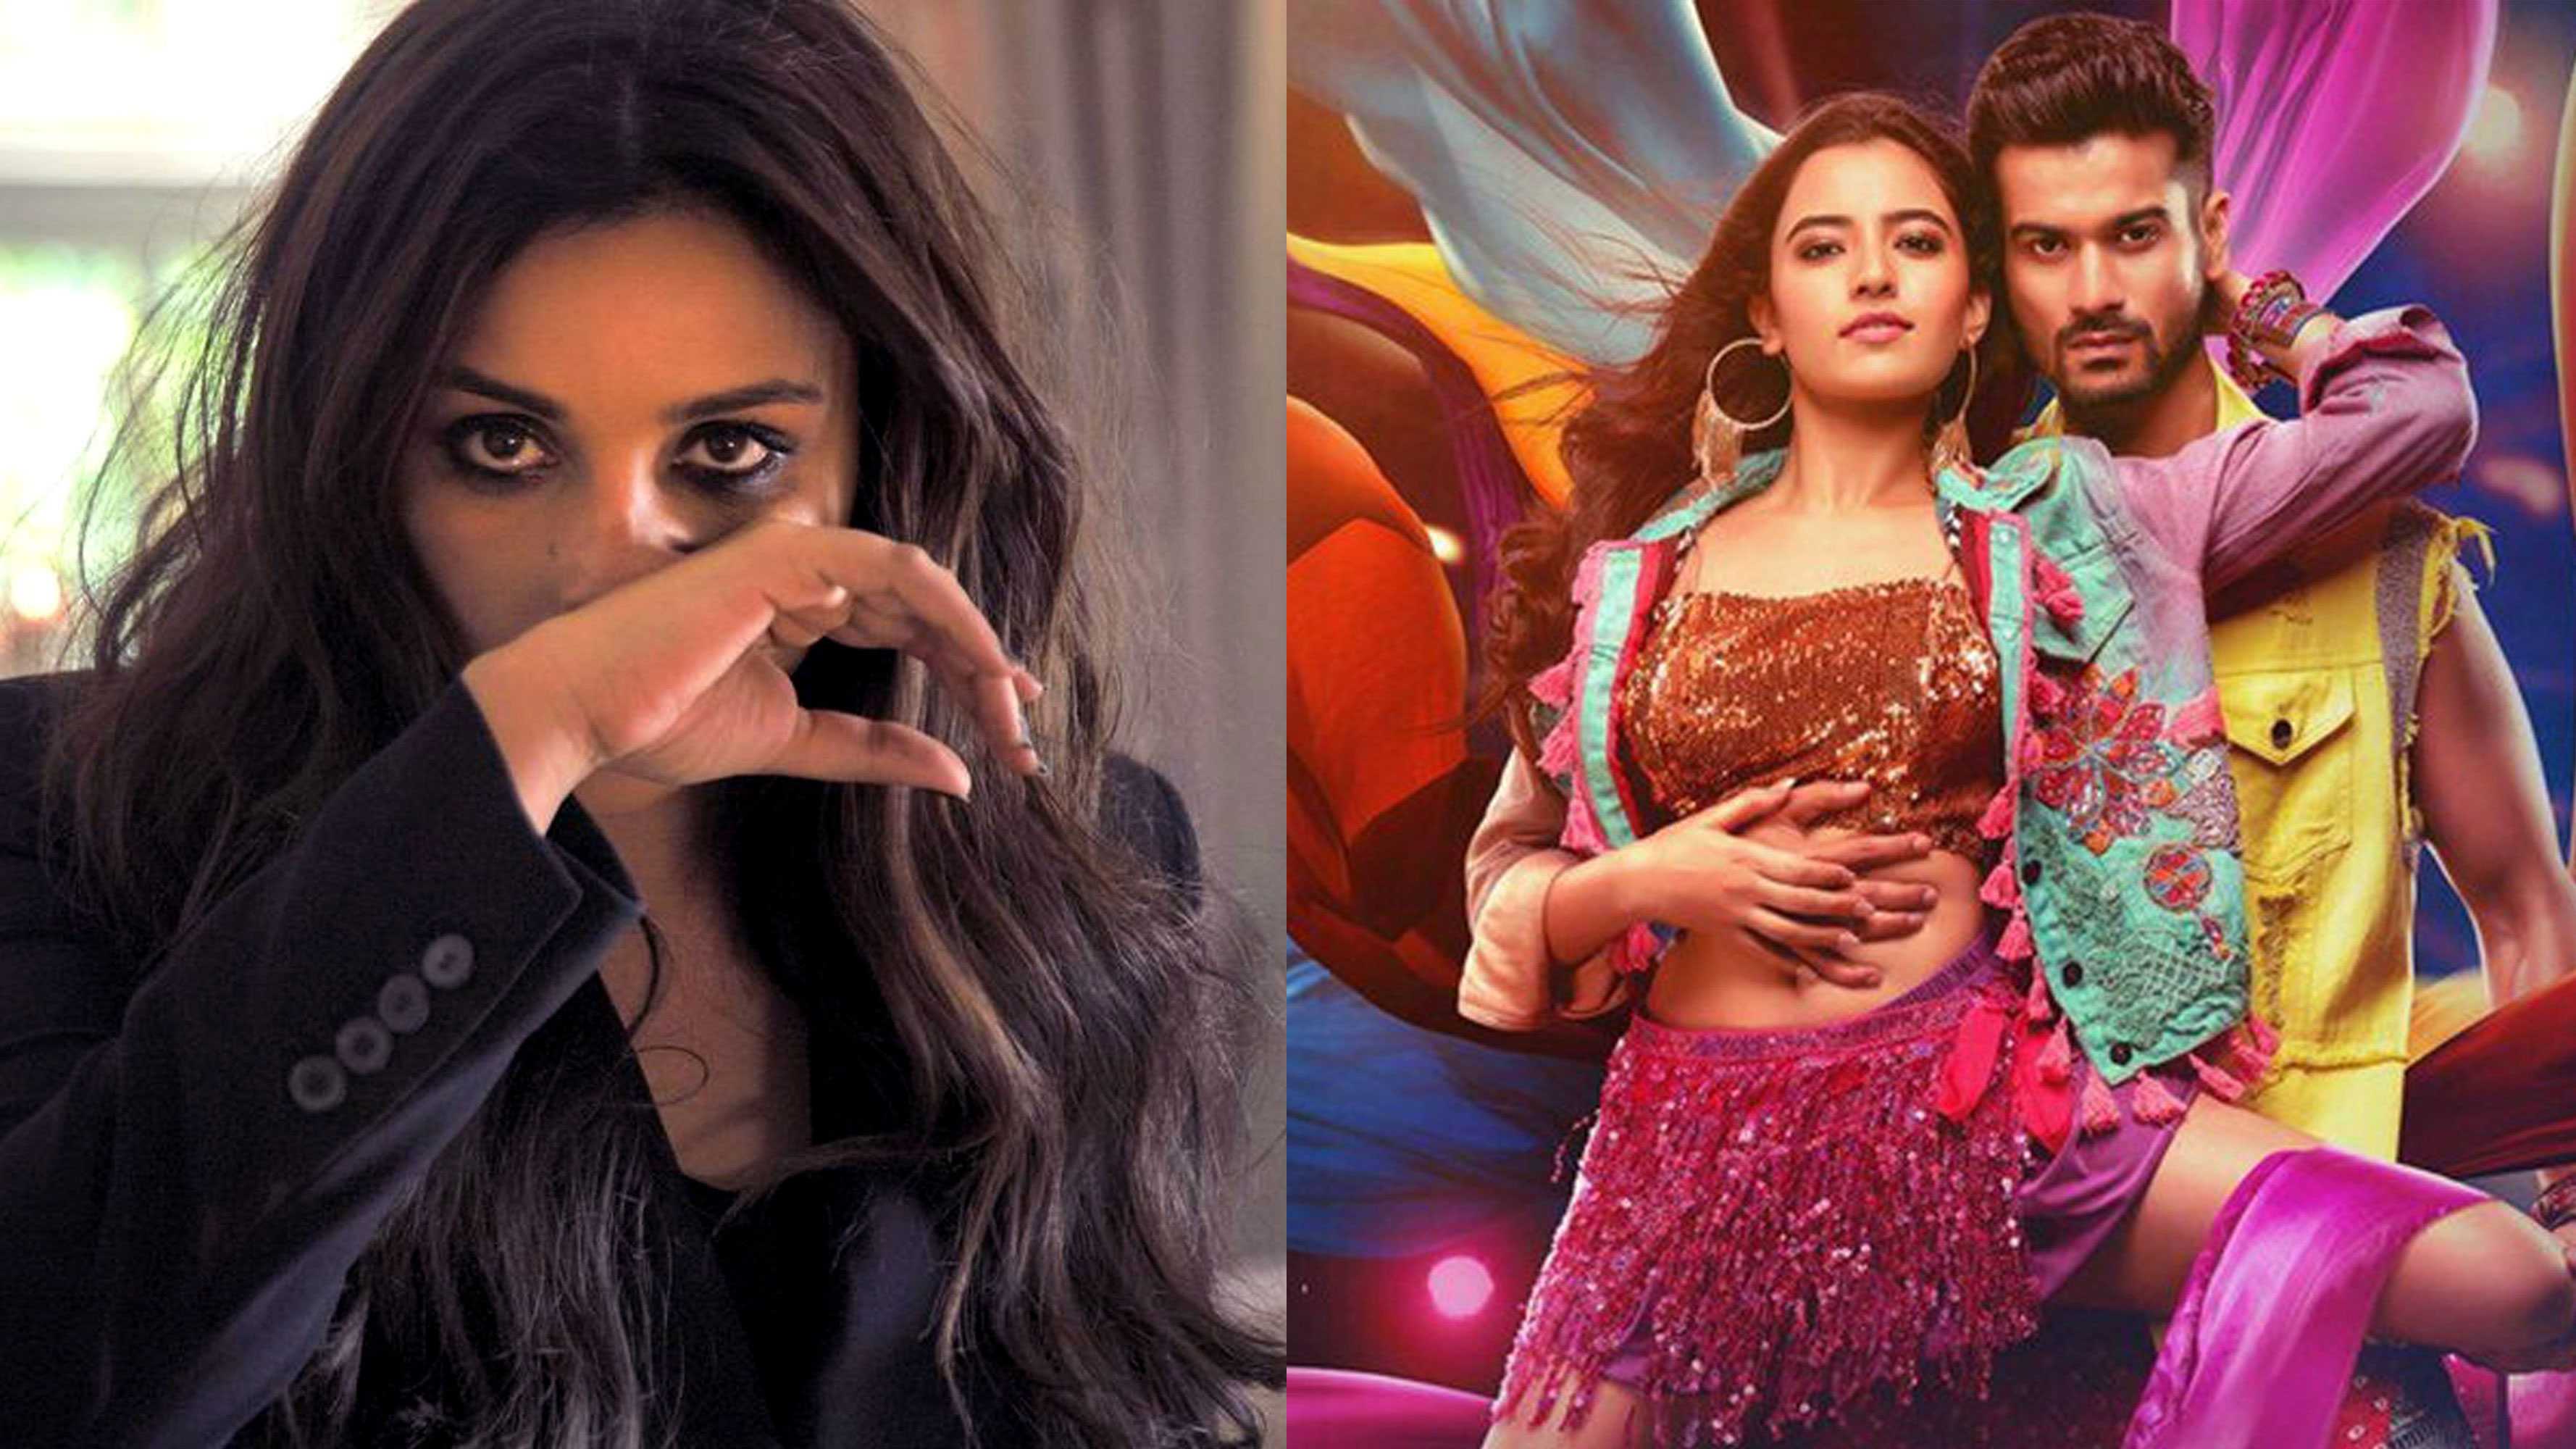 Tamil Keerthy Suresh Sex Imgrs - The 2020 Bollywood Movies We're Itching to See | Marie Claire